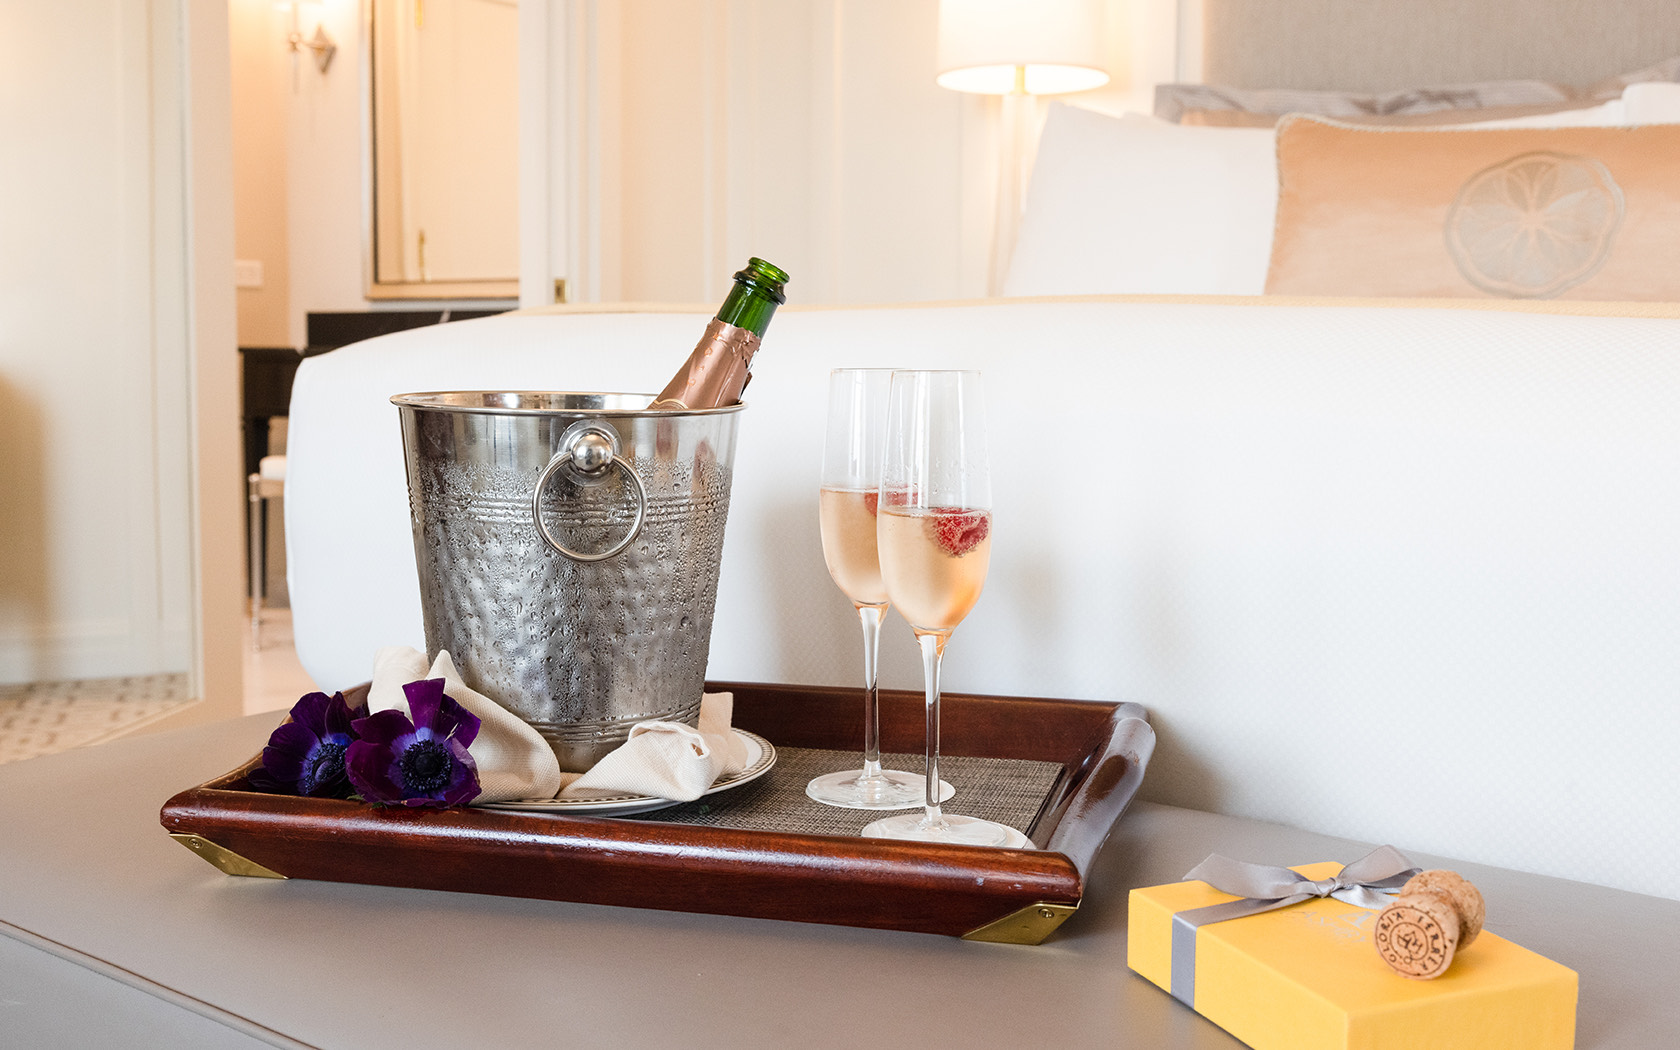 A tray with some signature treats and a bottle of champagne